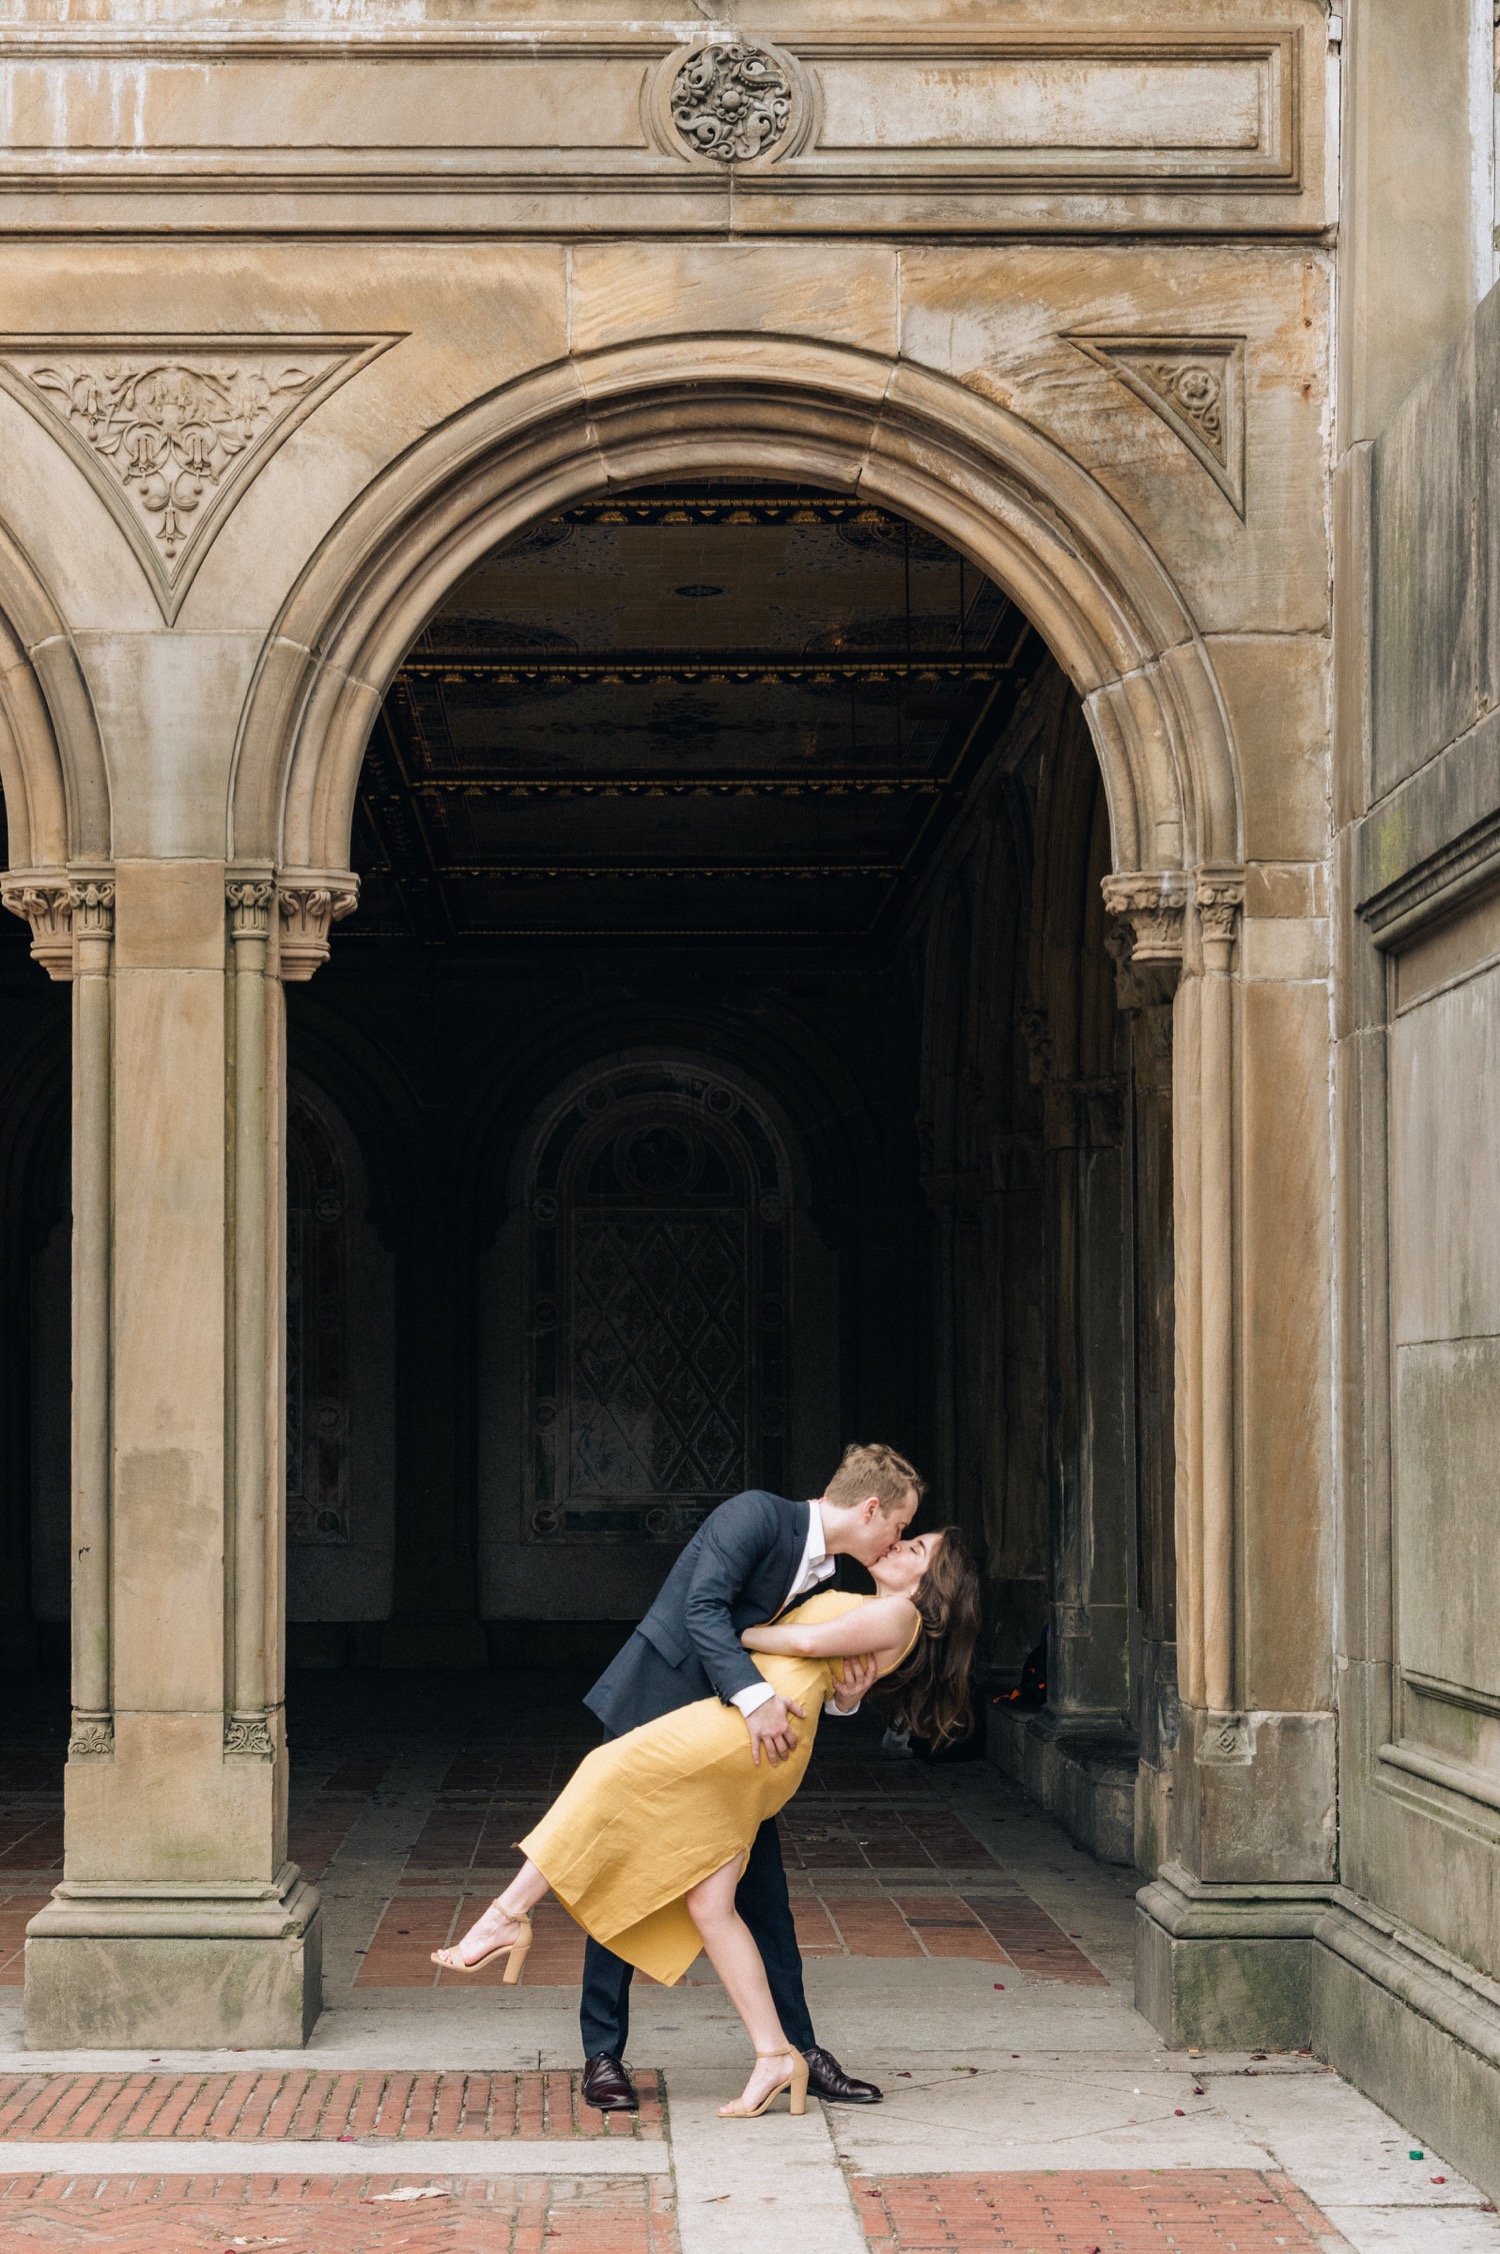 Couple at the Bethesda Terrace Arcade in Central Park